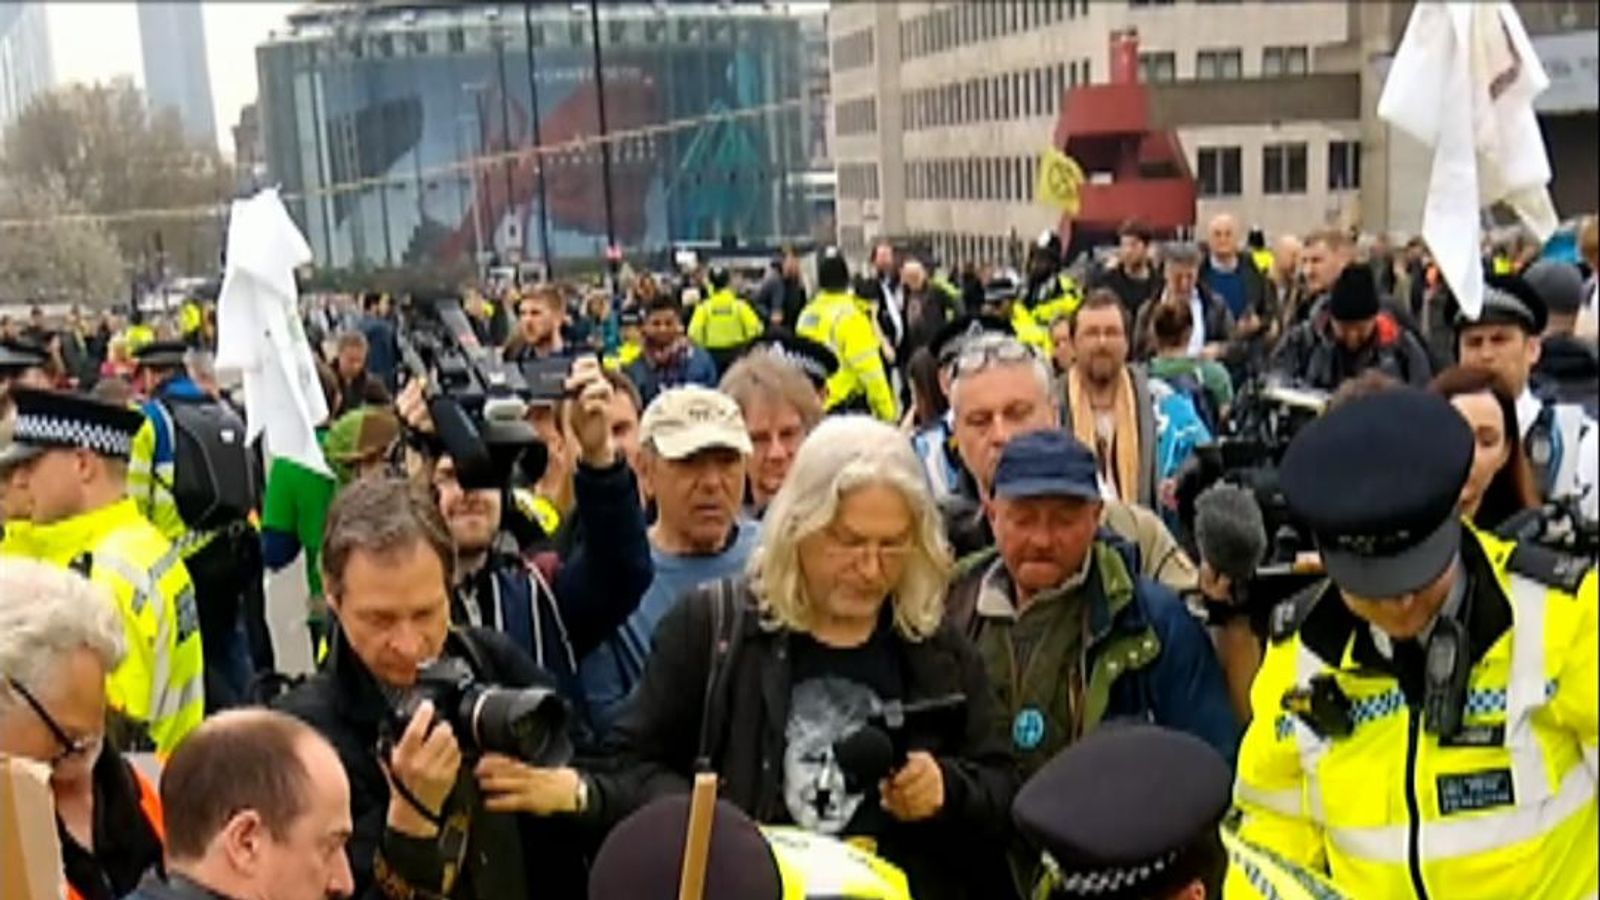 Moment Climate Protester Arrested On Waterloo Bridge Uk News Sky News 